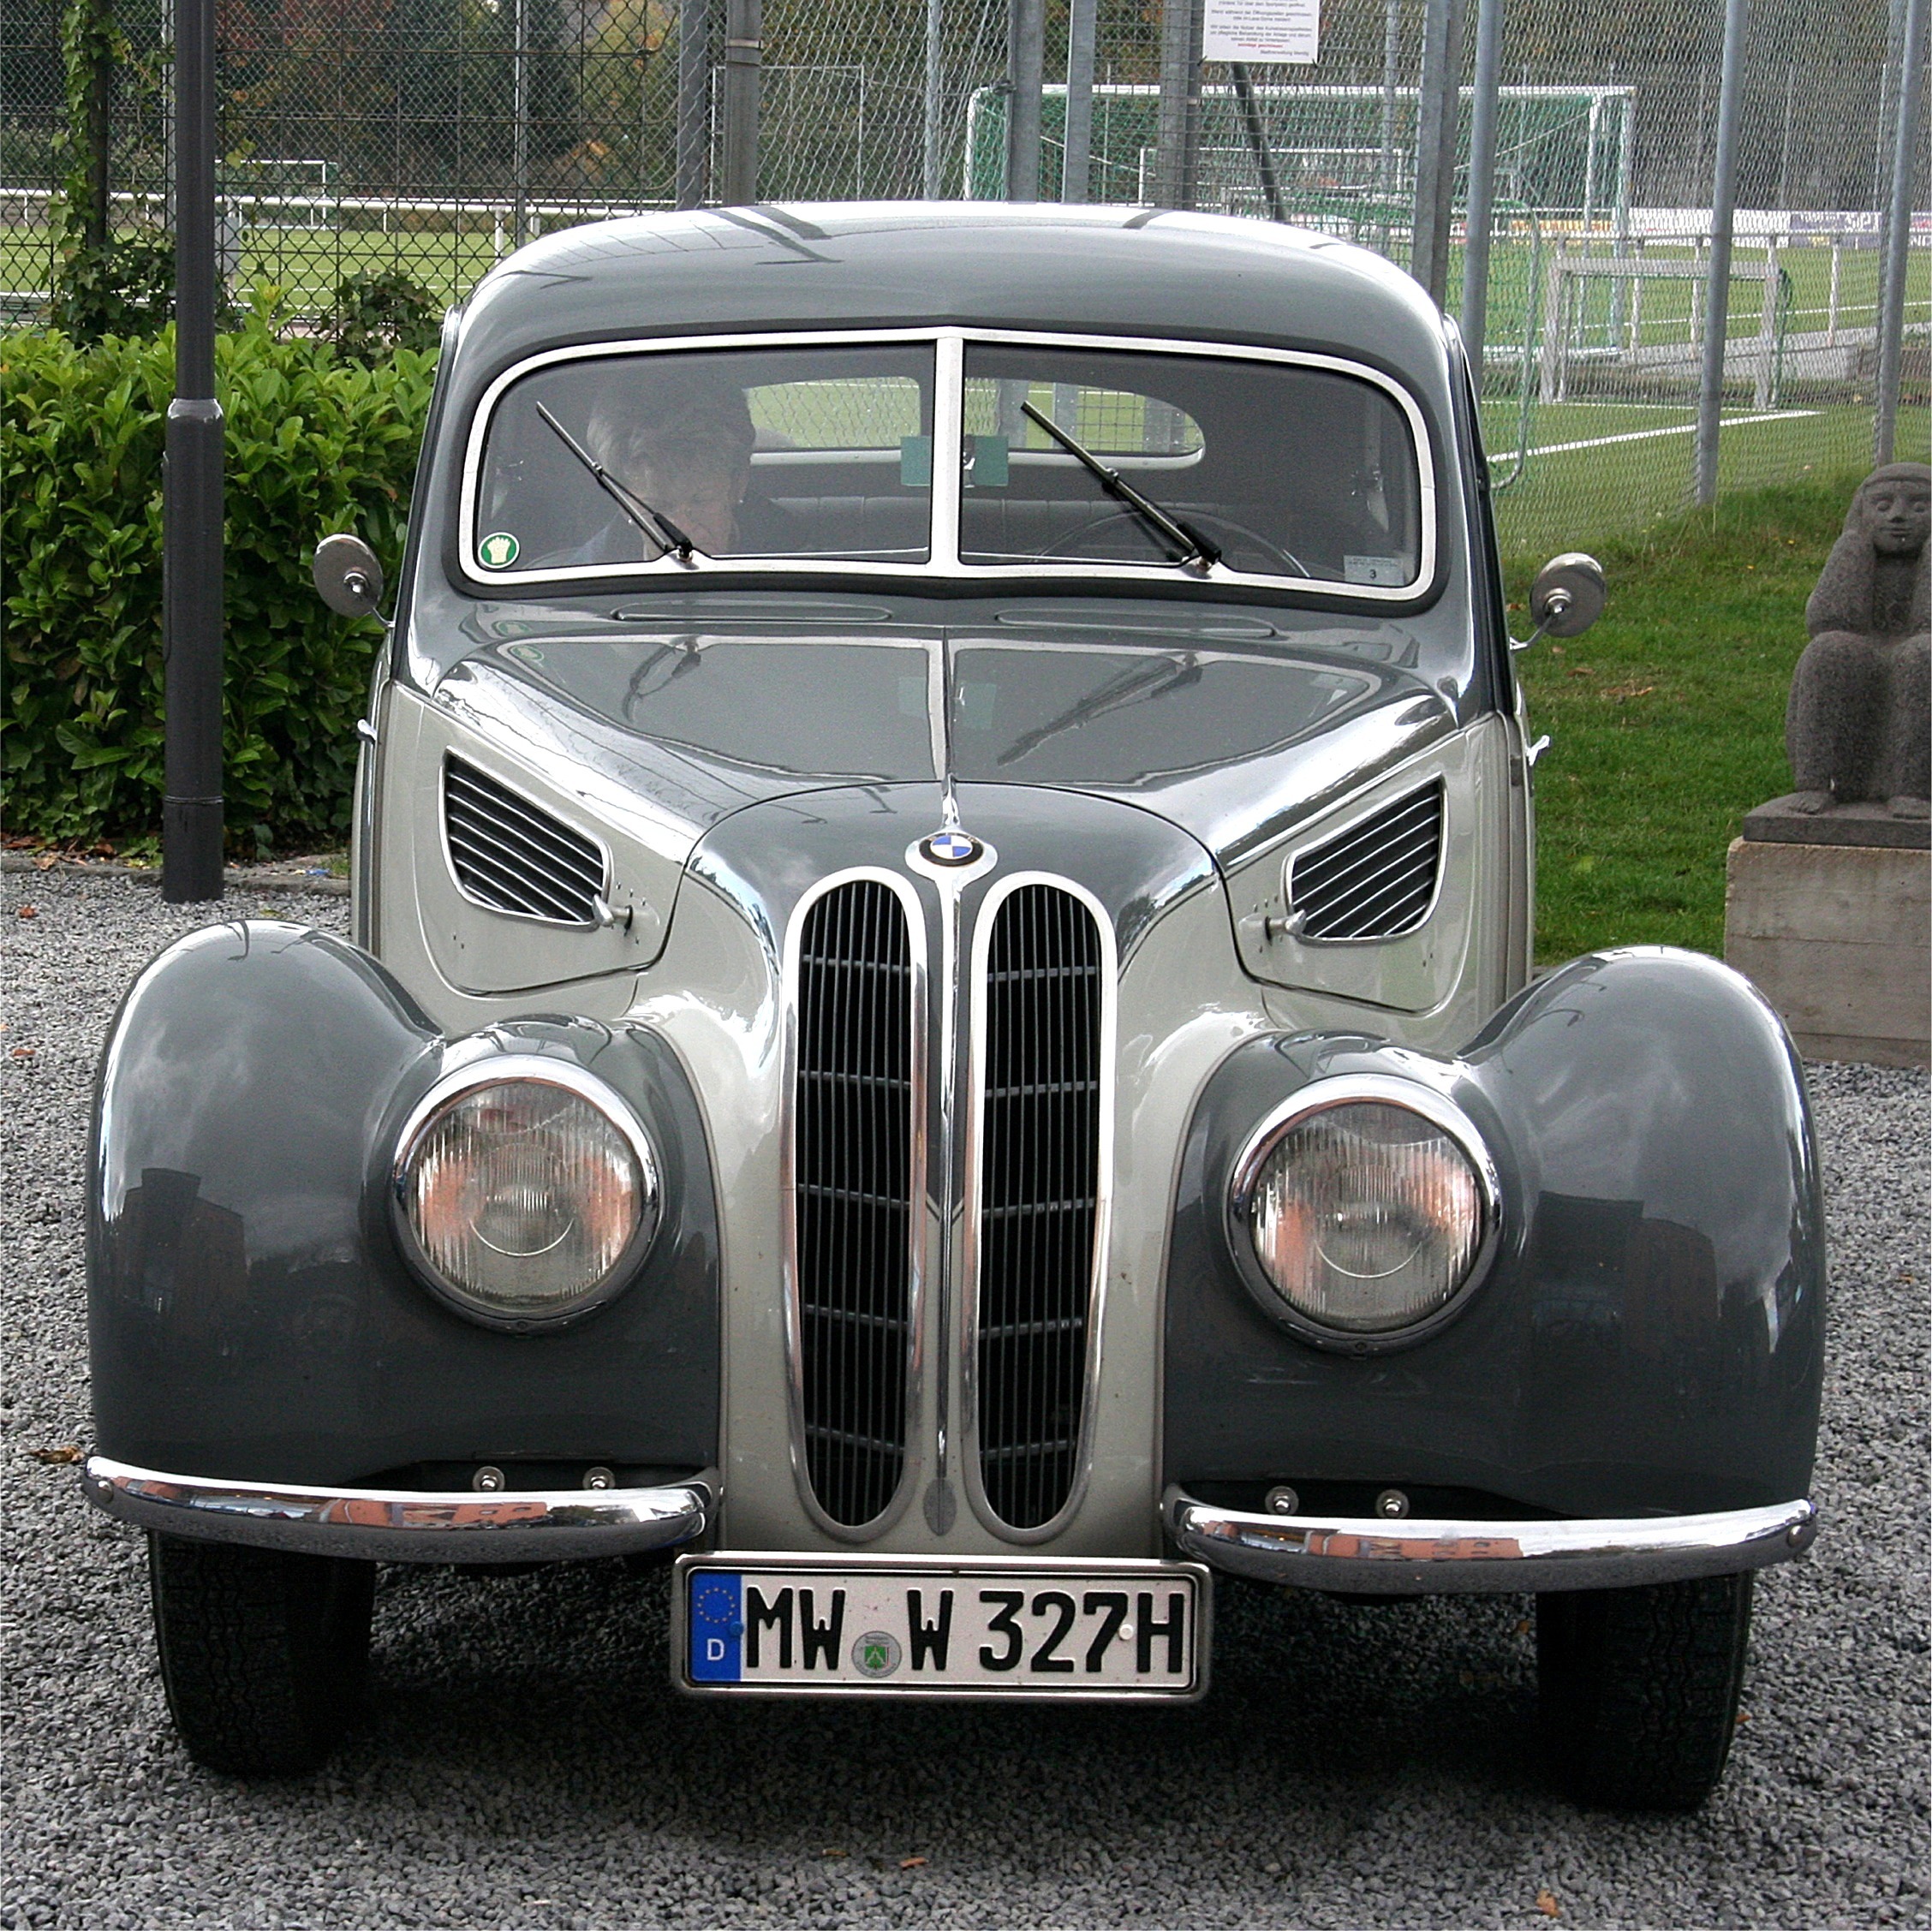 BMW 327, Bj. 1940 (2009-10-13) Front